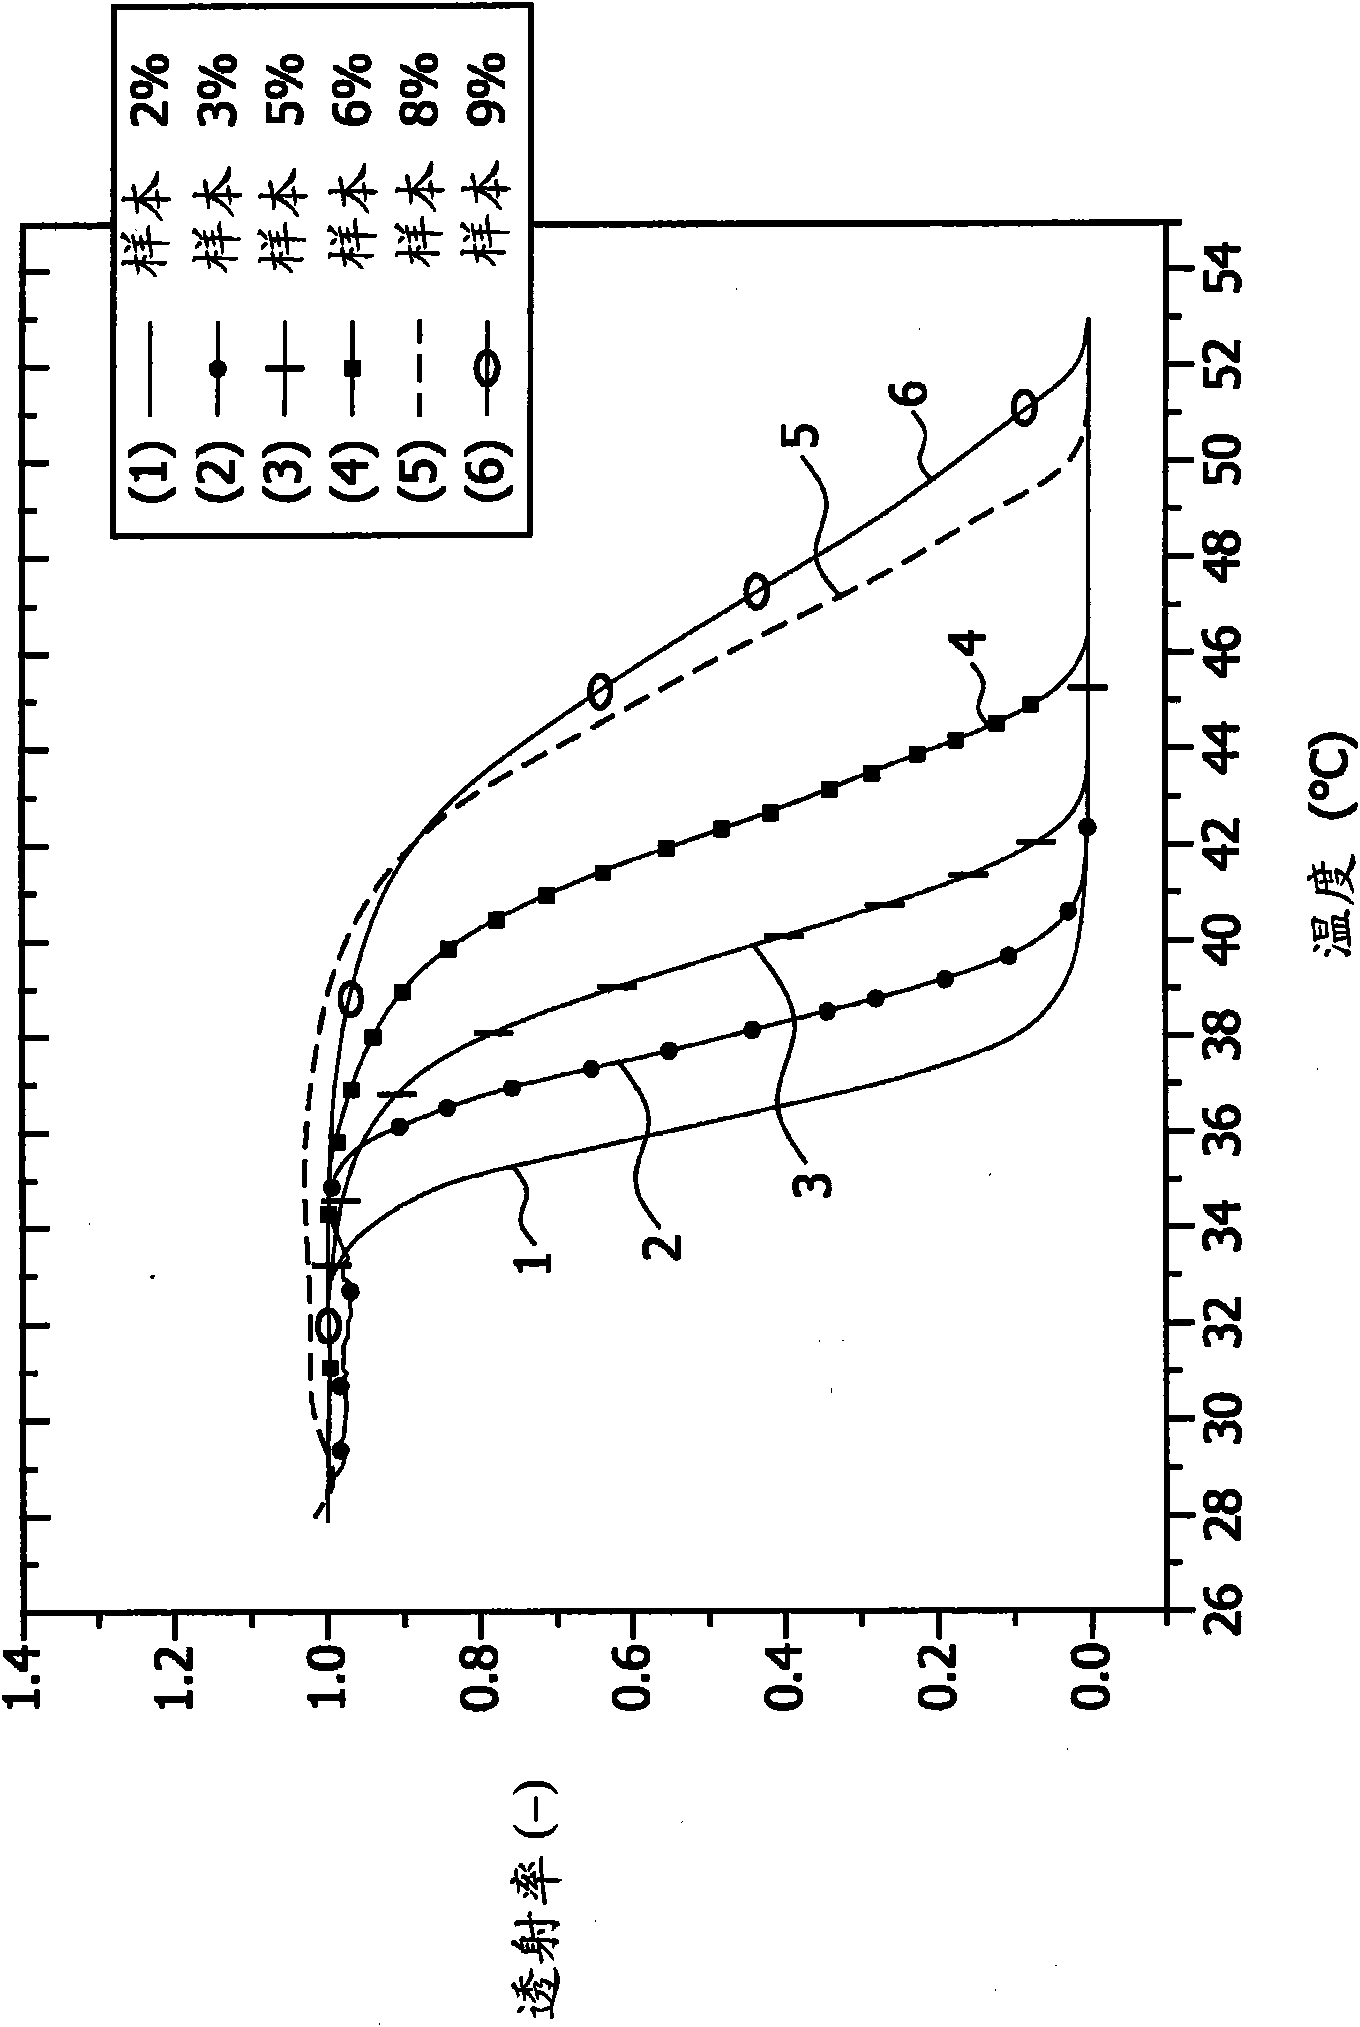 Tissue temperature indicating element for ultrasound therapy